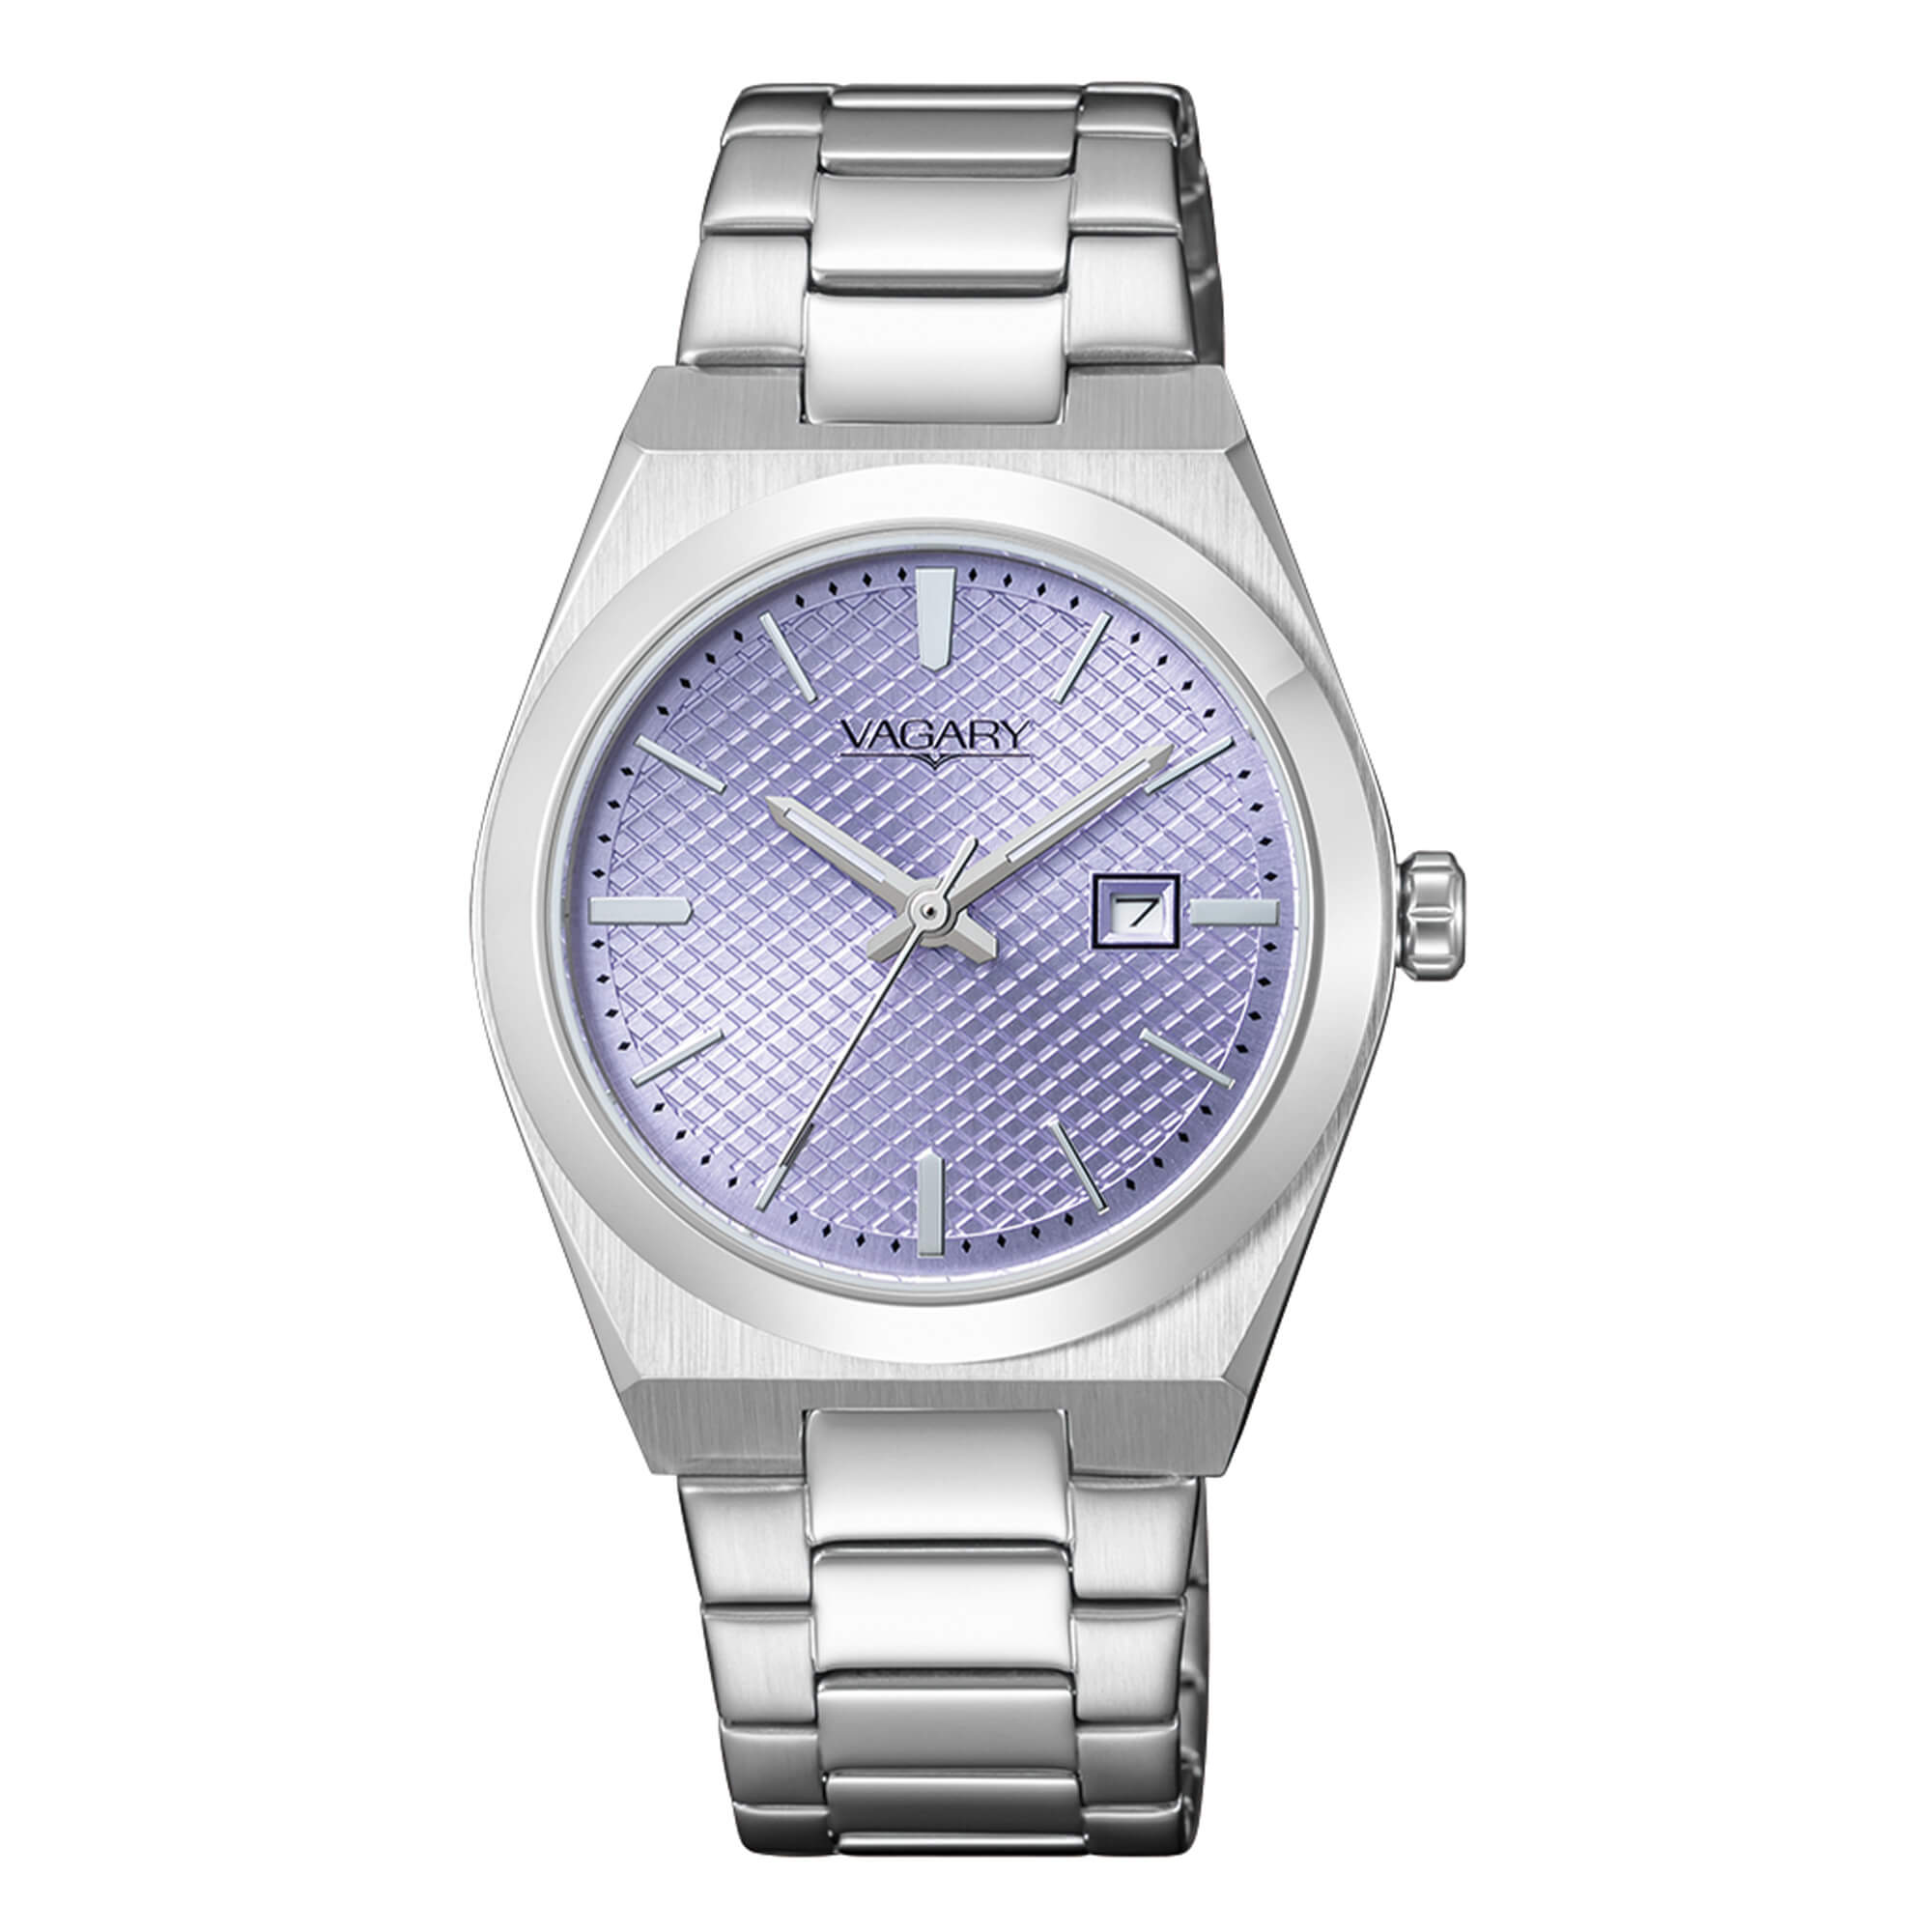 Vagary by Citizen, Timeless Lady, 32mm - IU3-118-95